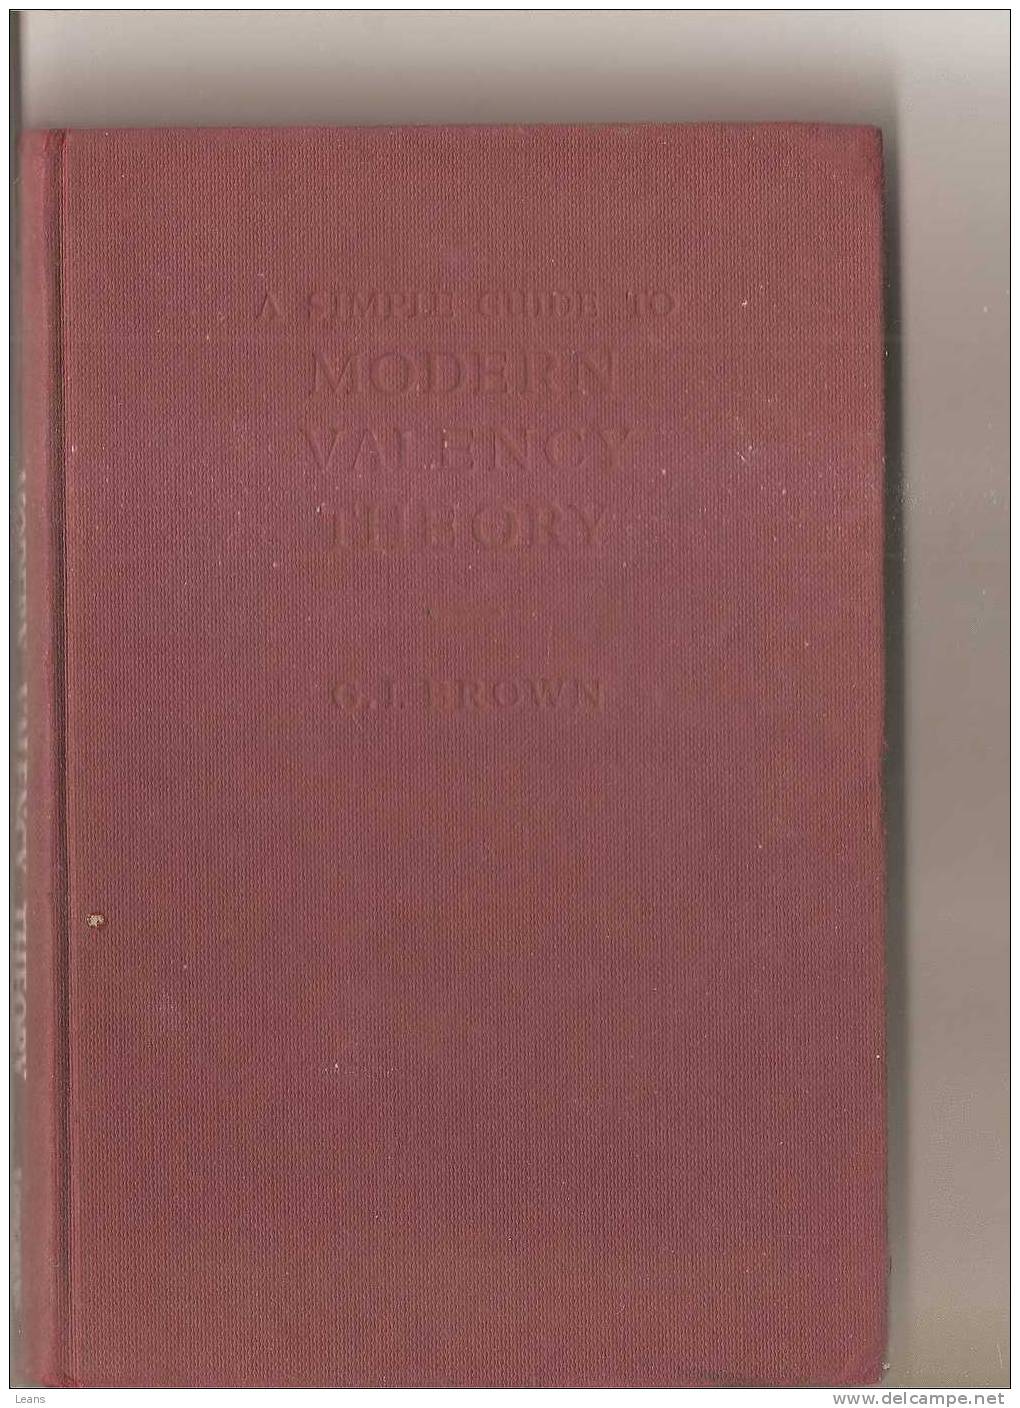 A SIMPLE GUIDE TO MODERN VALENCY THEORY    Ed: BROWN - Ciencia